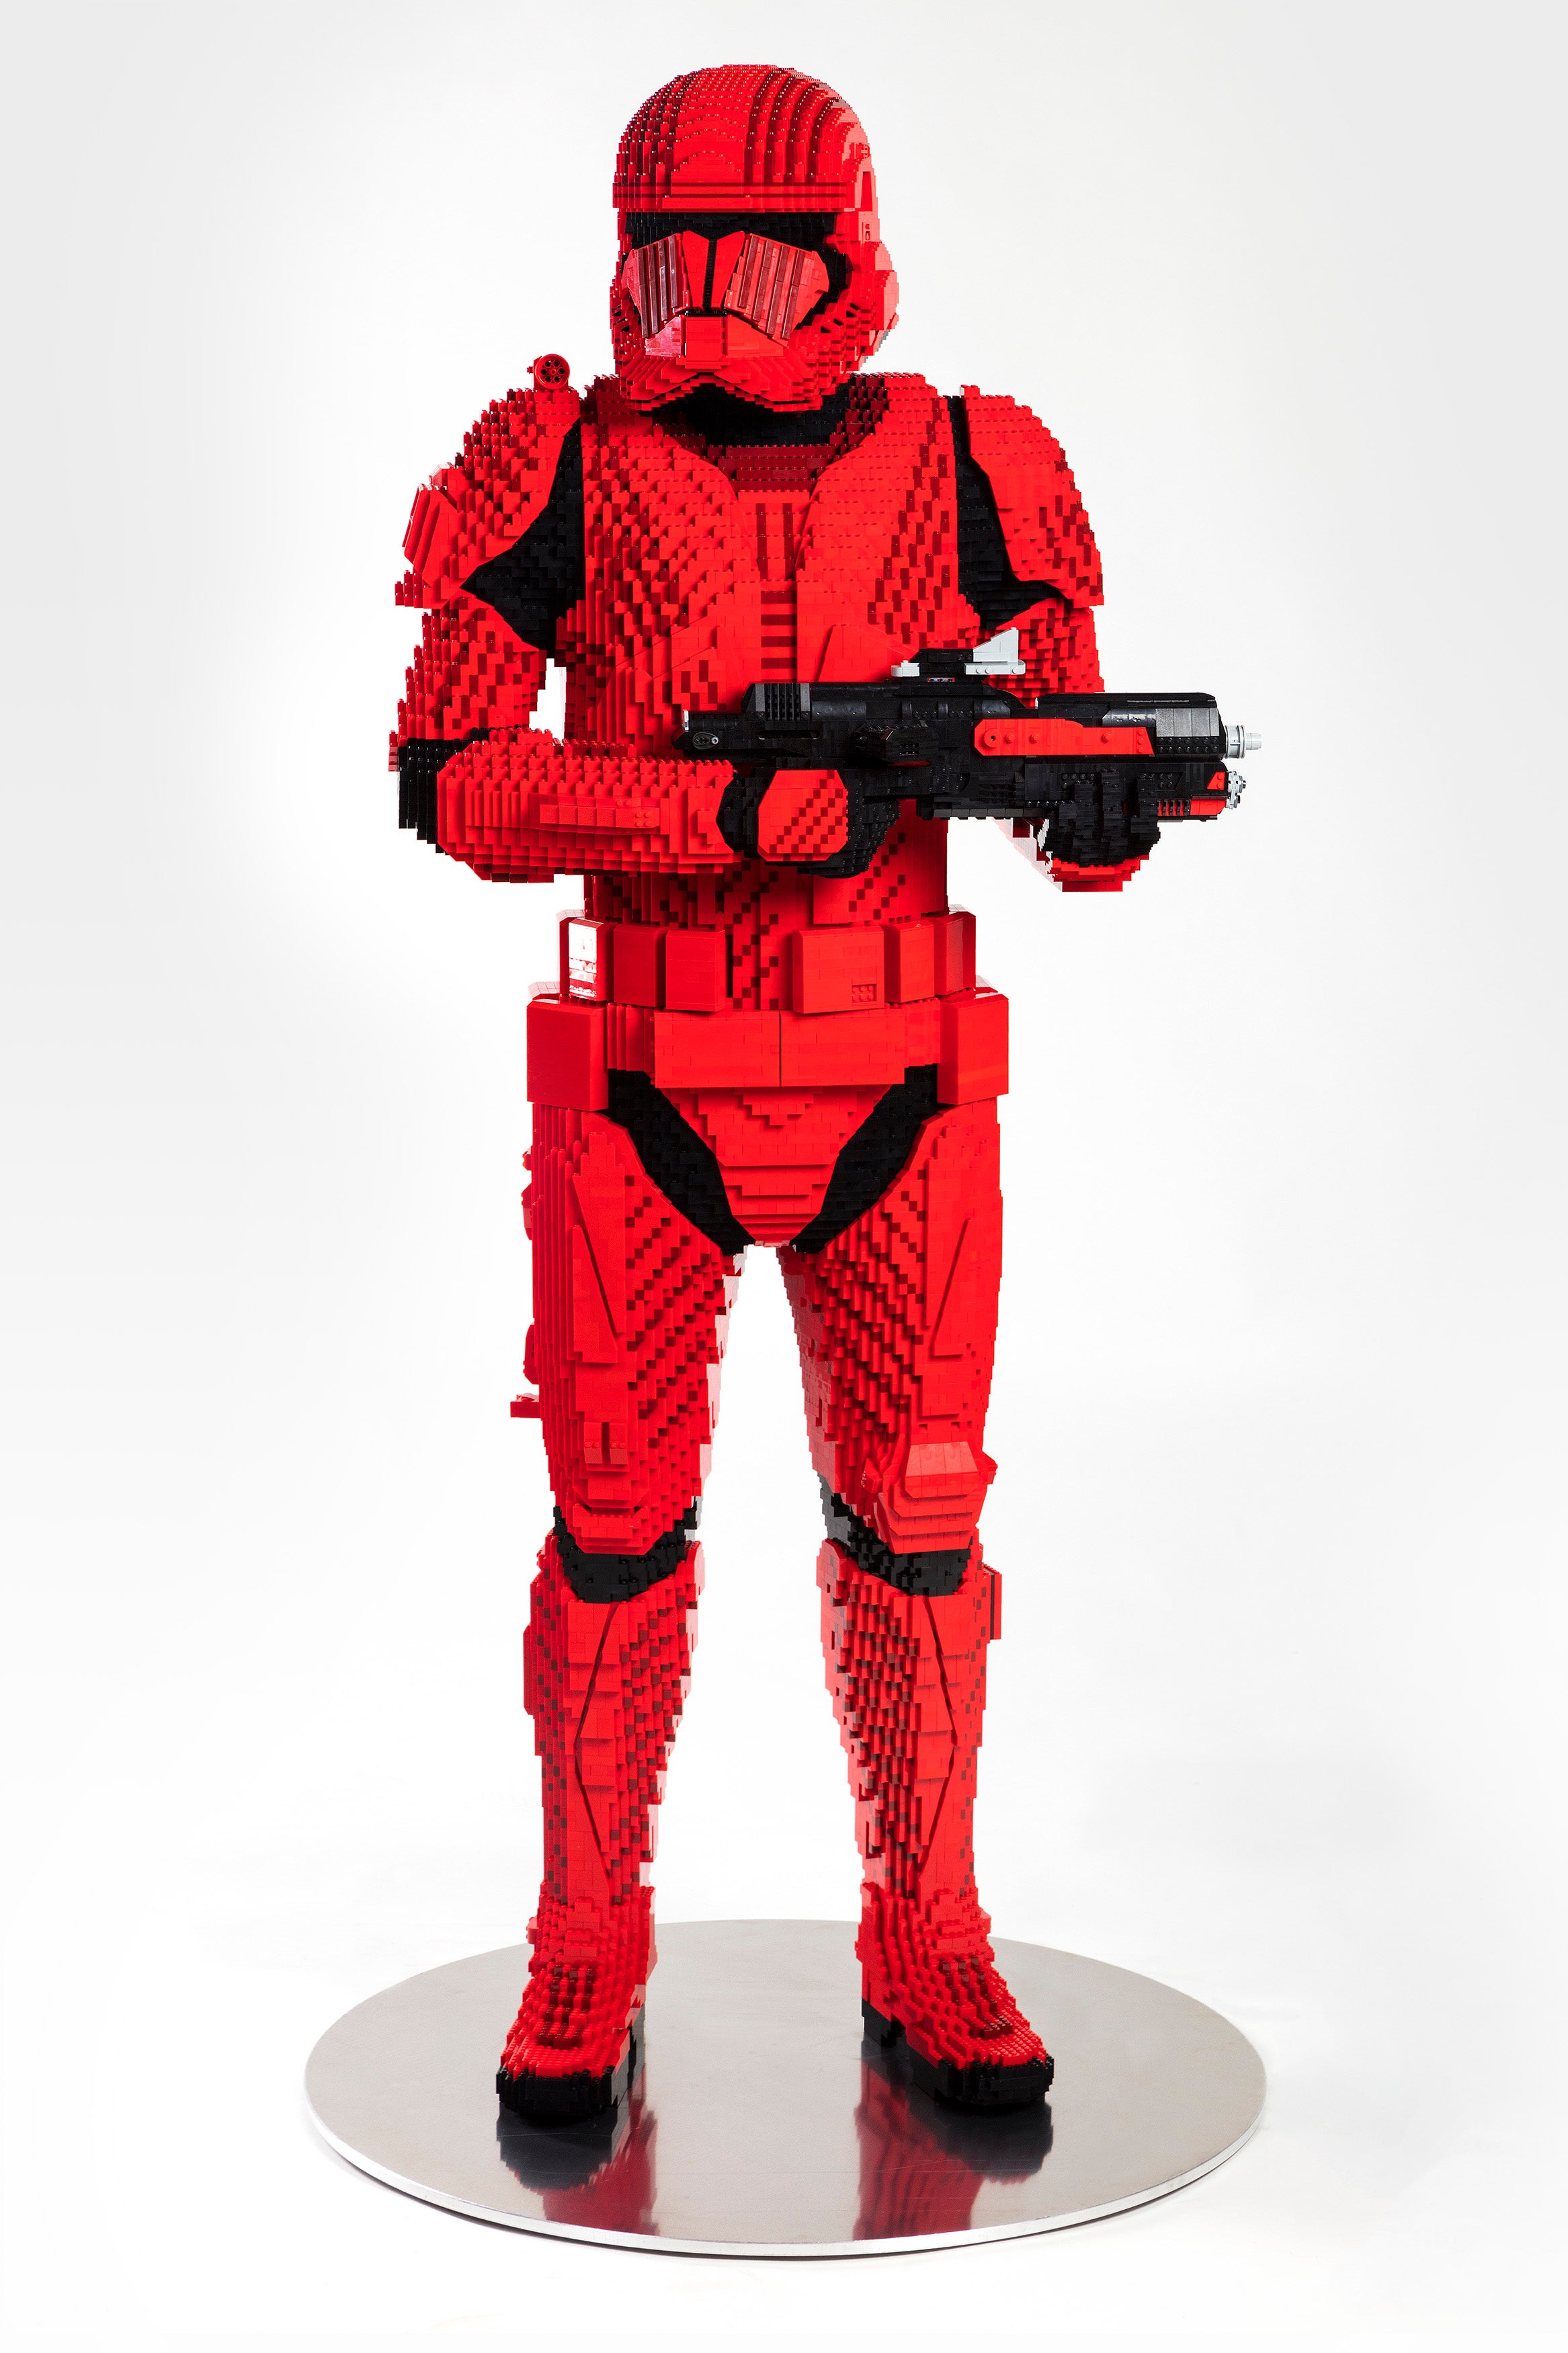 LEGO_Sith_Trooper_SDCC2019_Front